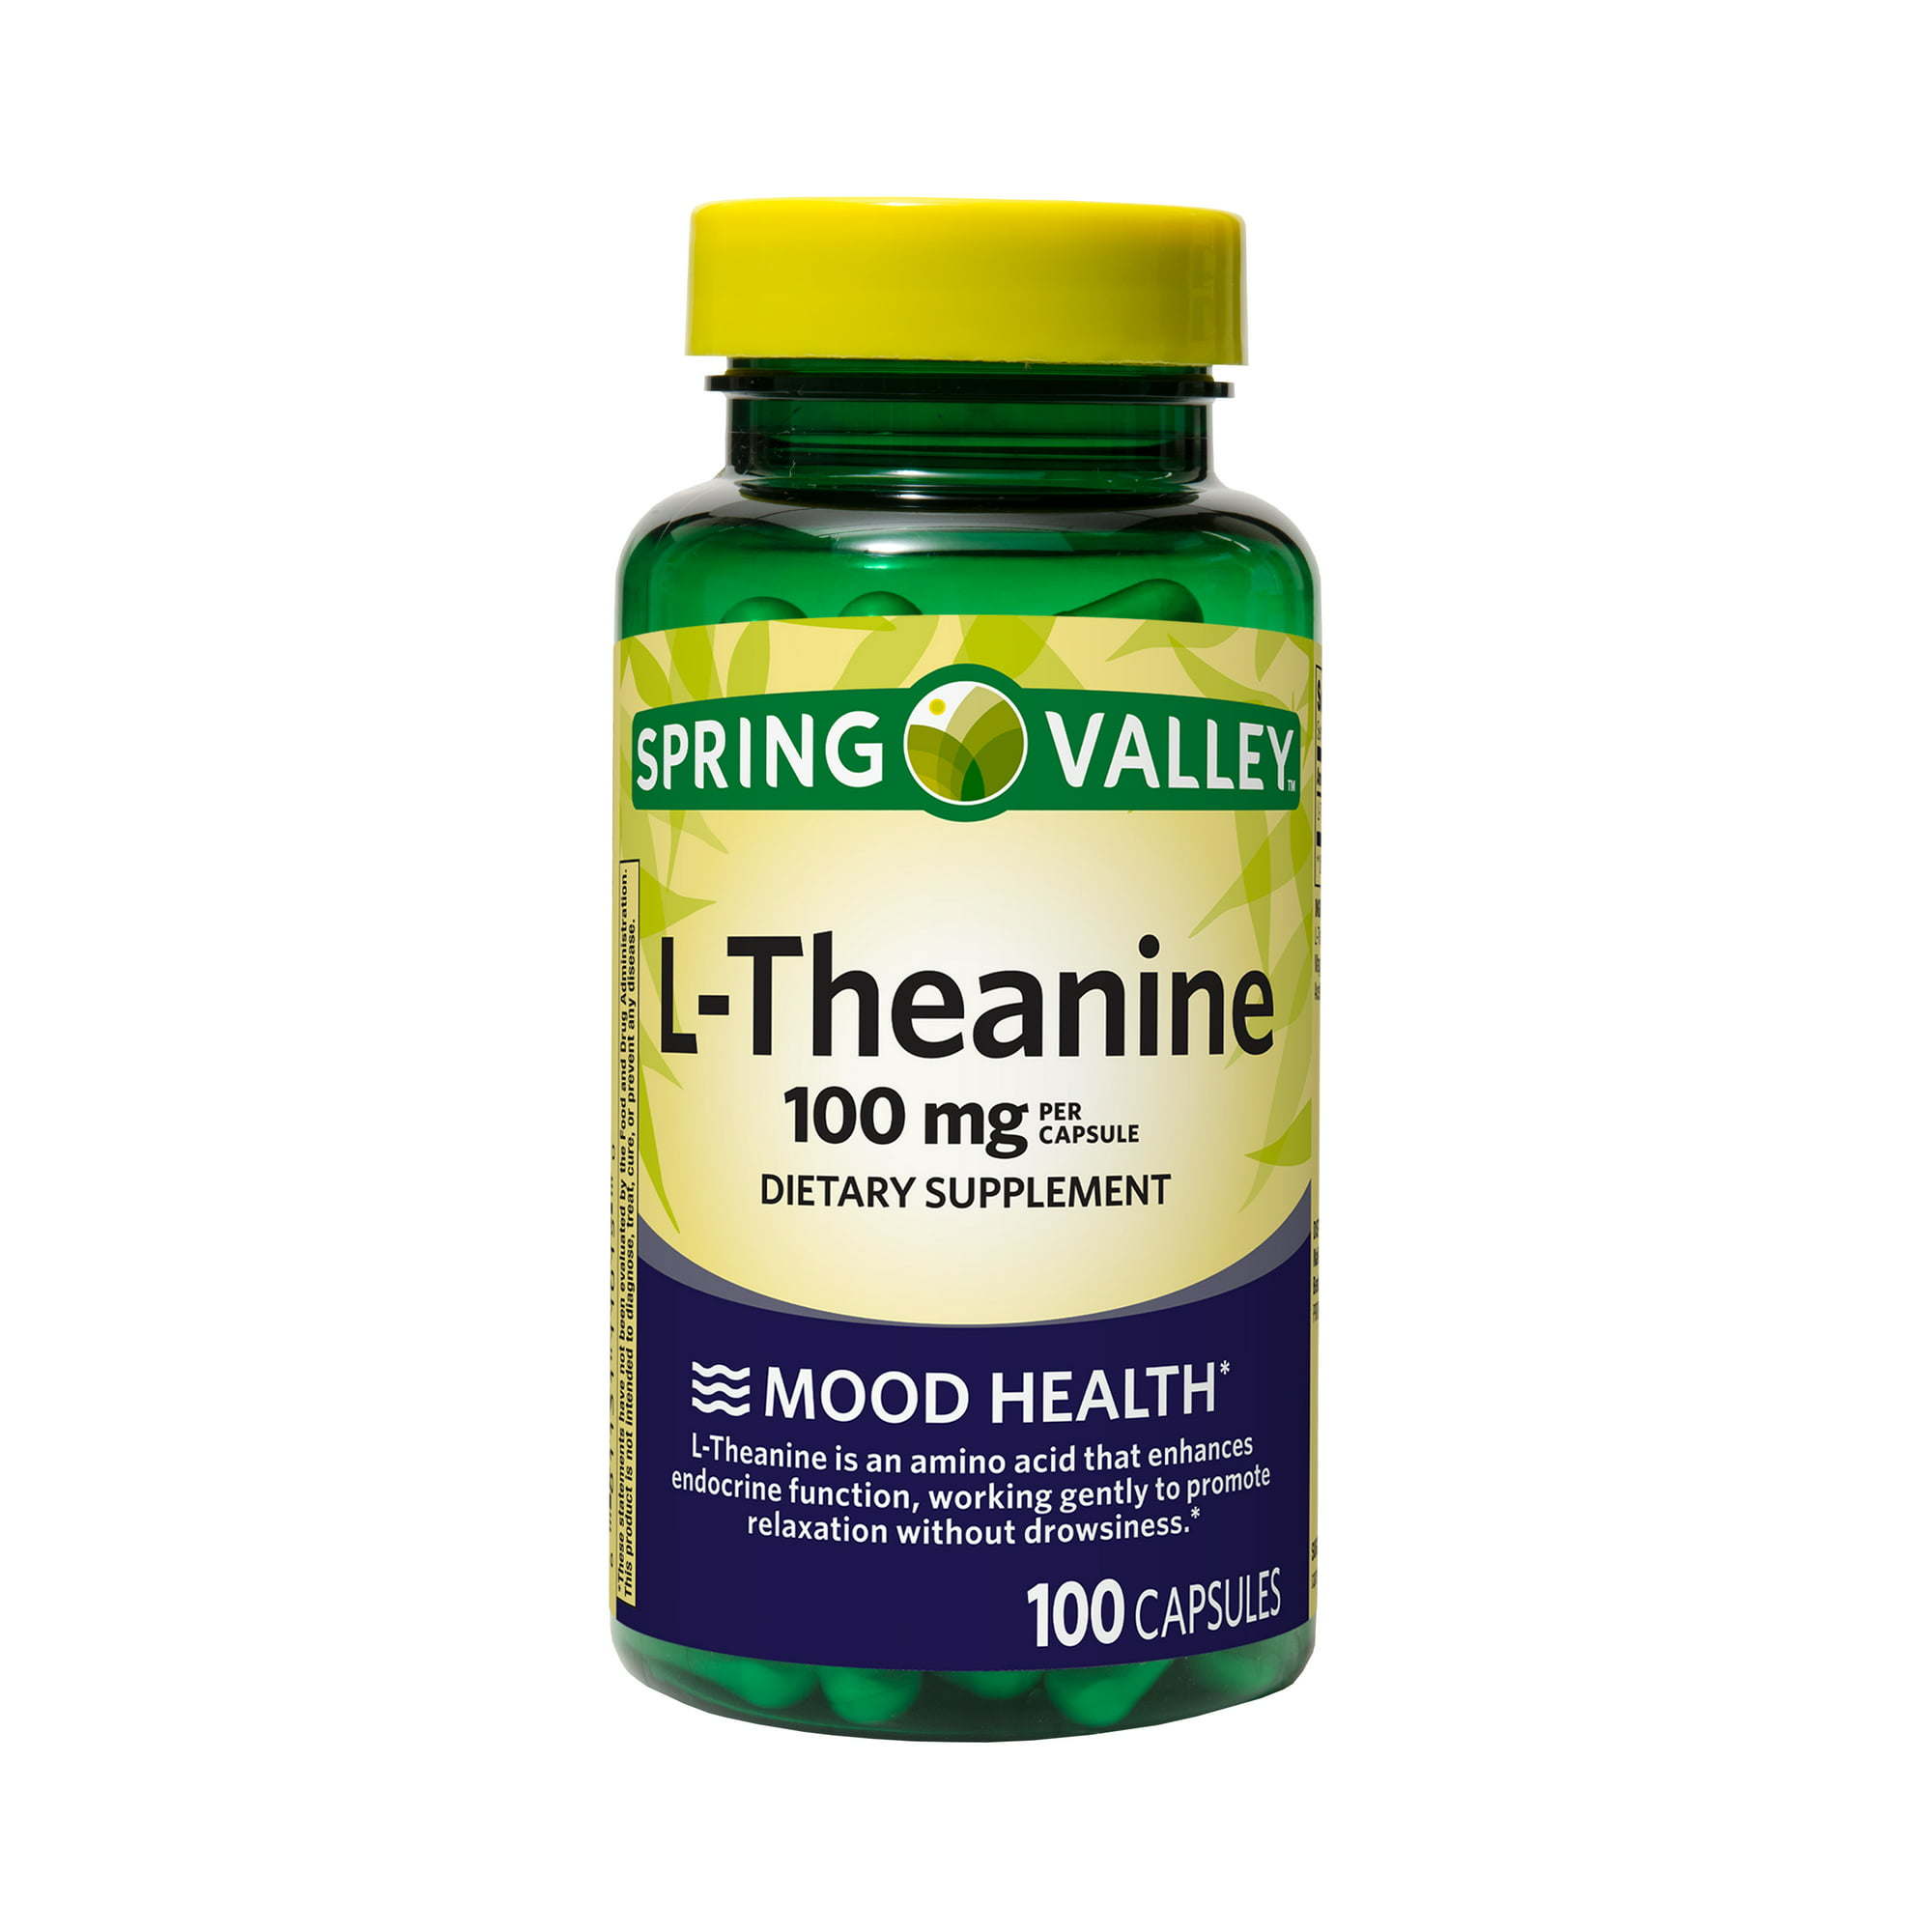 Spring Valley L-Theanine Capsules - Dietary Supplement, 100mg, 100 Count